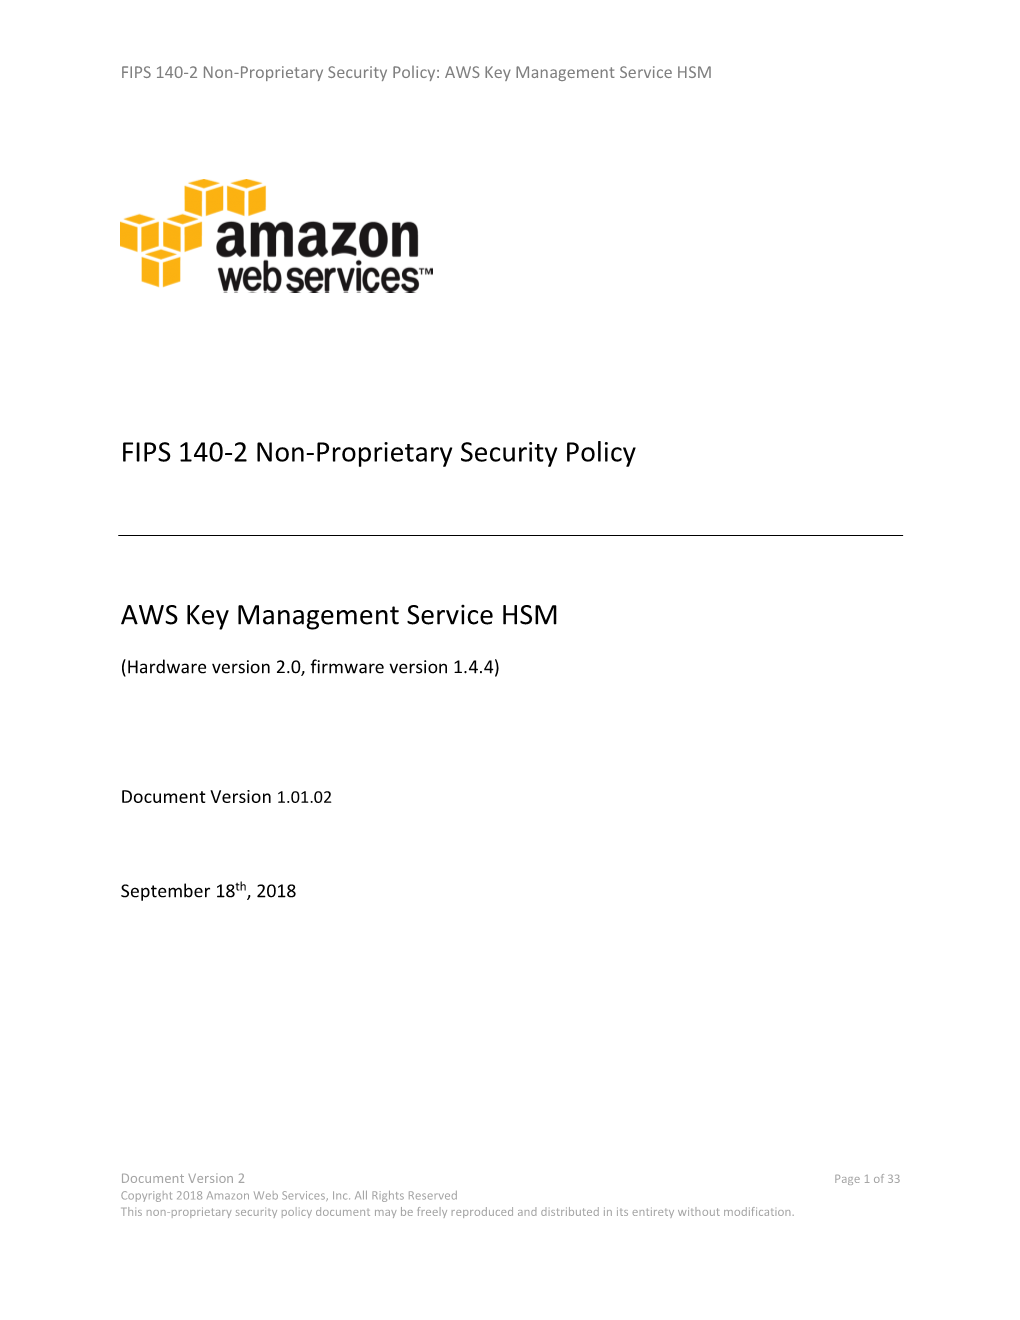 AWS KMS Hardware Security Module FIPS 140-2 Non-Proprietary